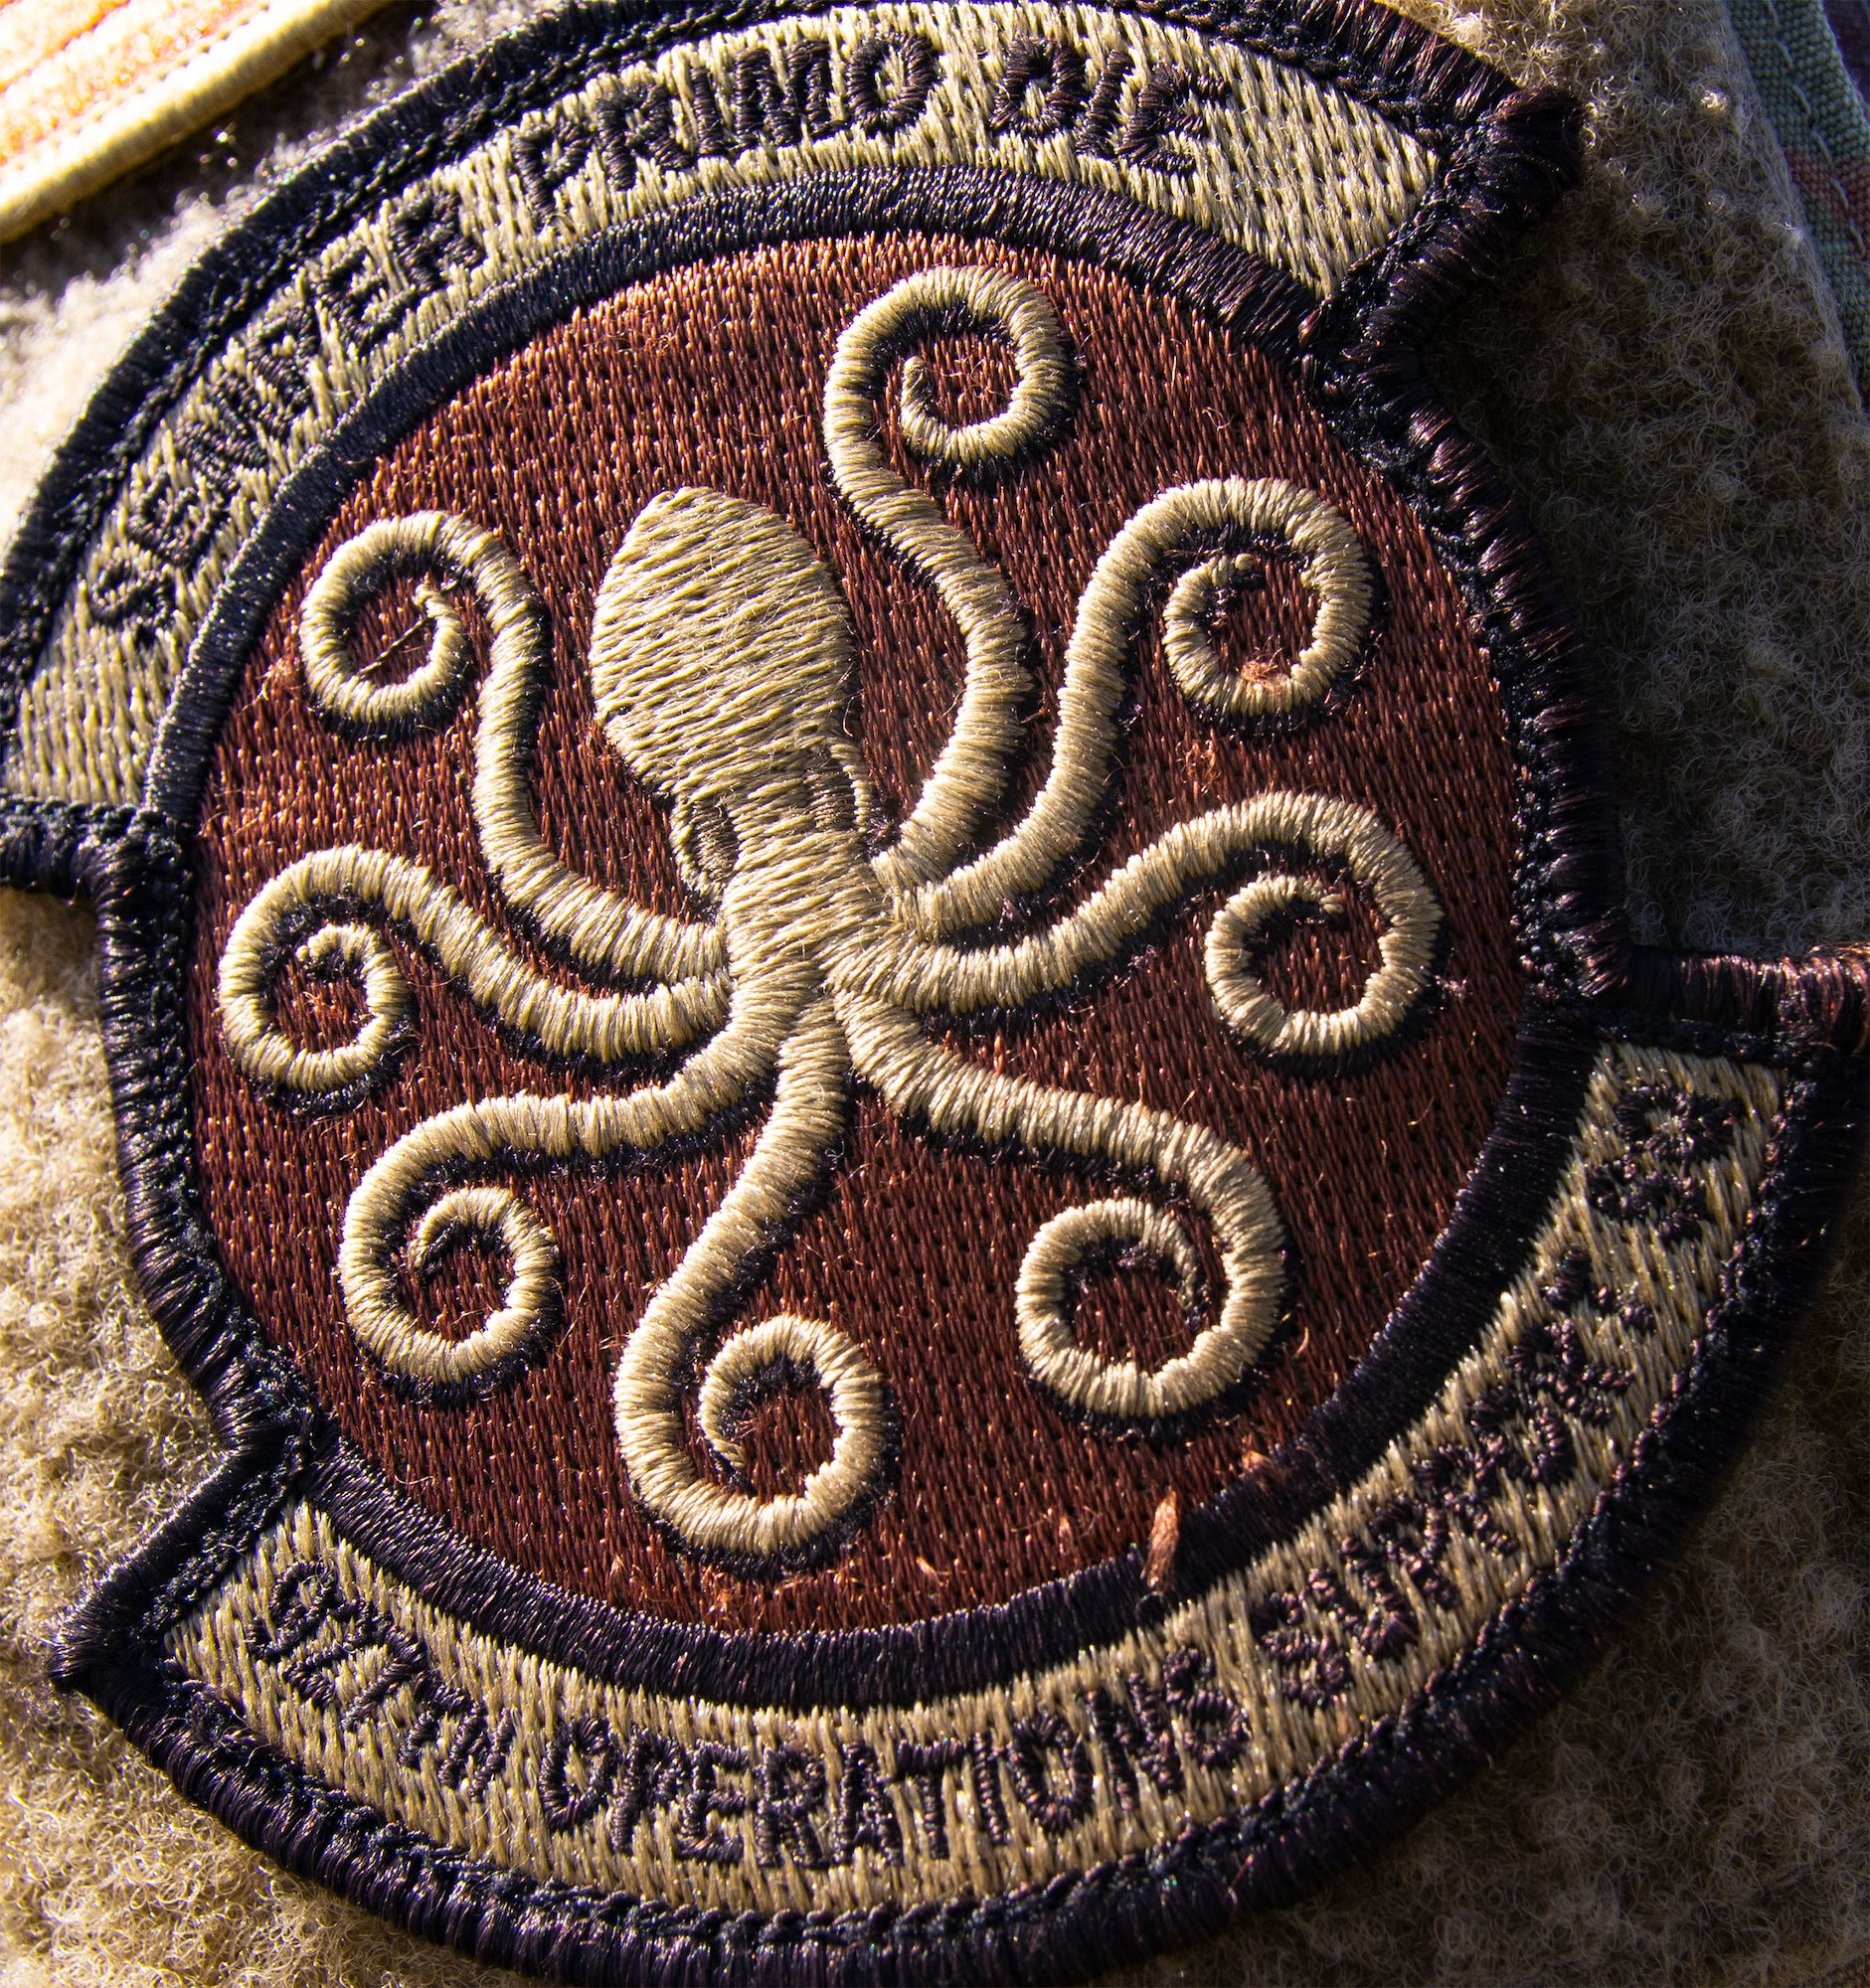 The newly approved emblem of the 927th Operations Support Squadron is pictured in the configuration and color scheme for the Air Force Occupational Camouflage Pattern uniform. Illustrated within the patch is an eight-armed sea monster known as the "Kraken" as well as the Squadron’s motto “Semper Primo Die,” which is Latin for “Always the first day.” (U.S. Air Force photo by Tech Sgt. Bradley Tipton)